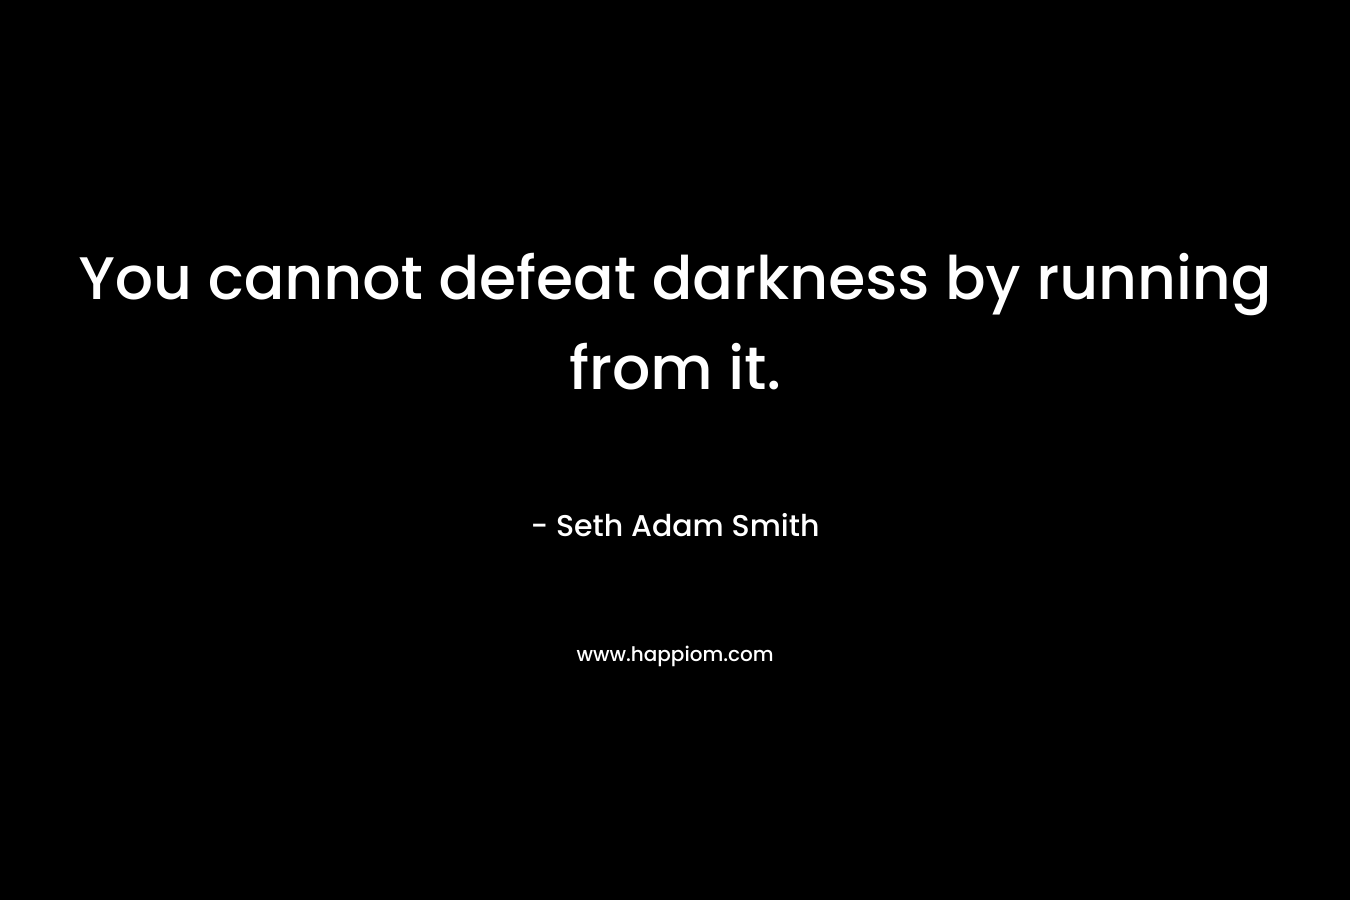 You cannot defeat darkness by running from it.